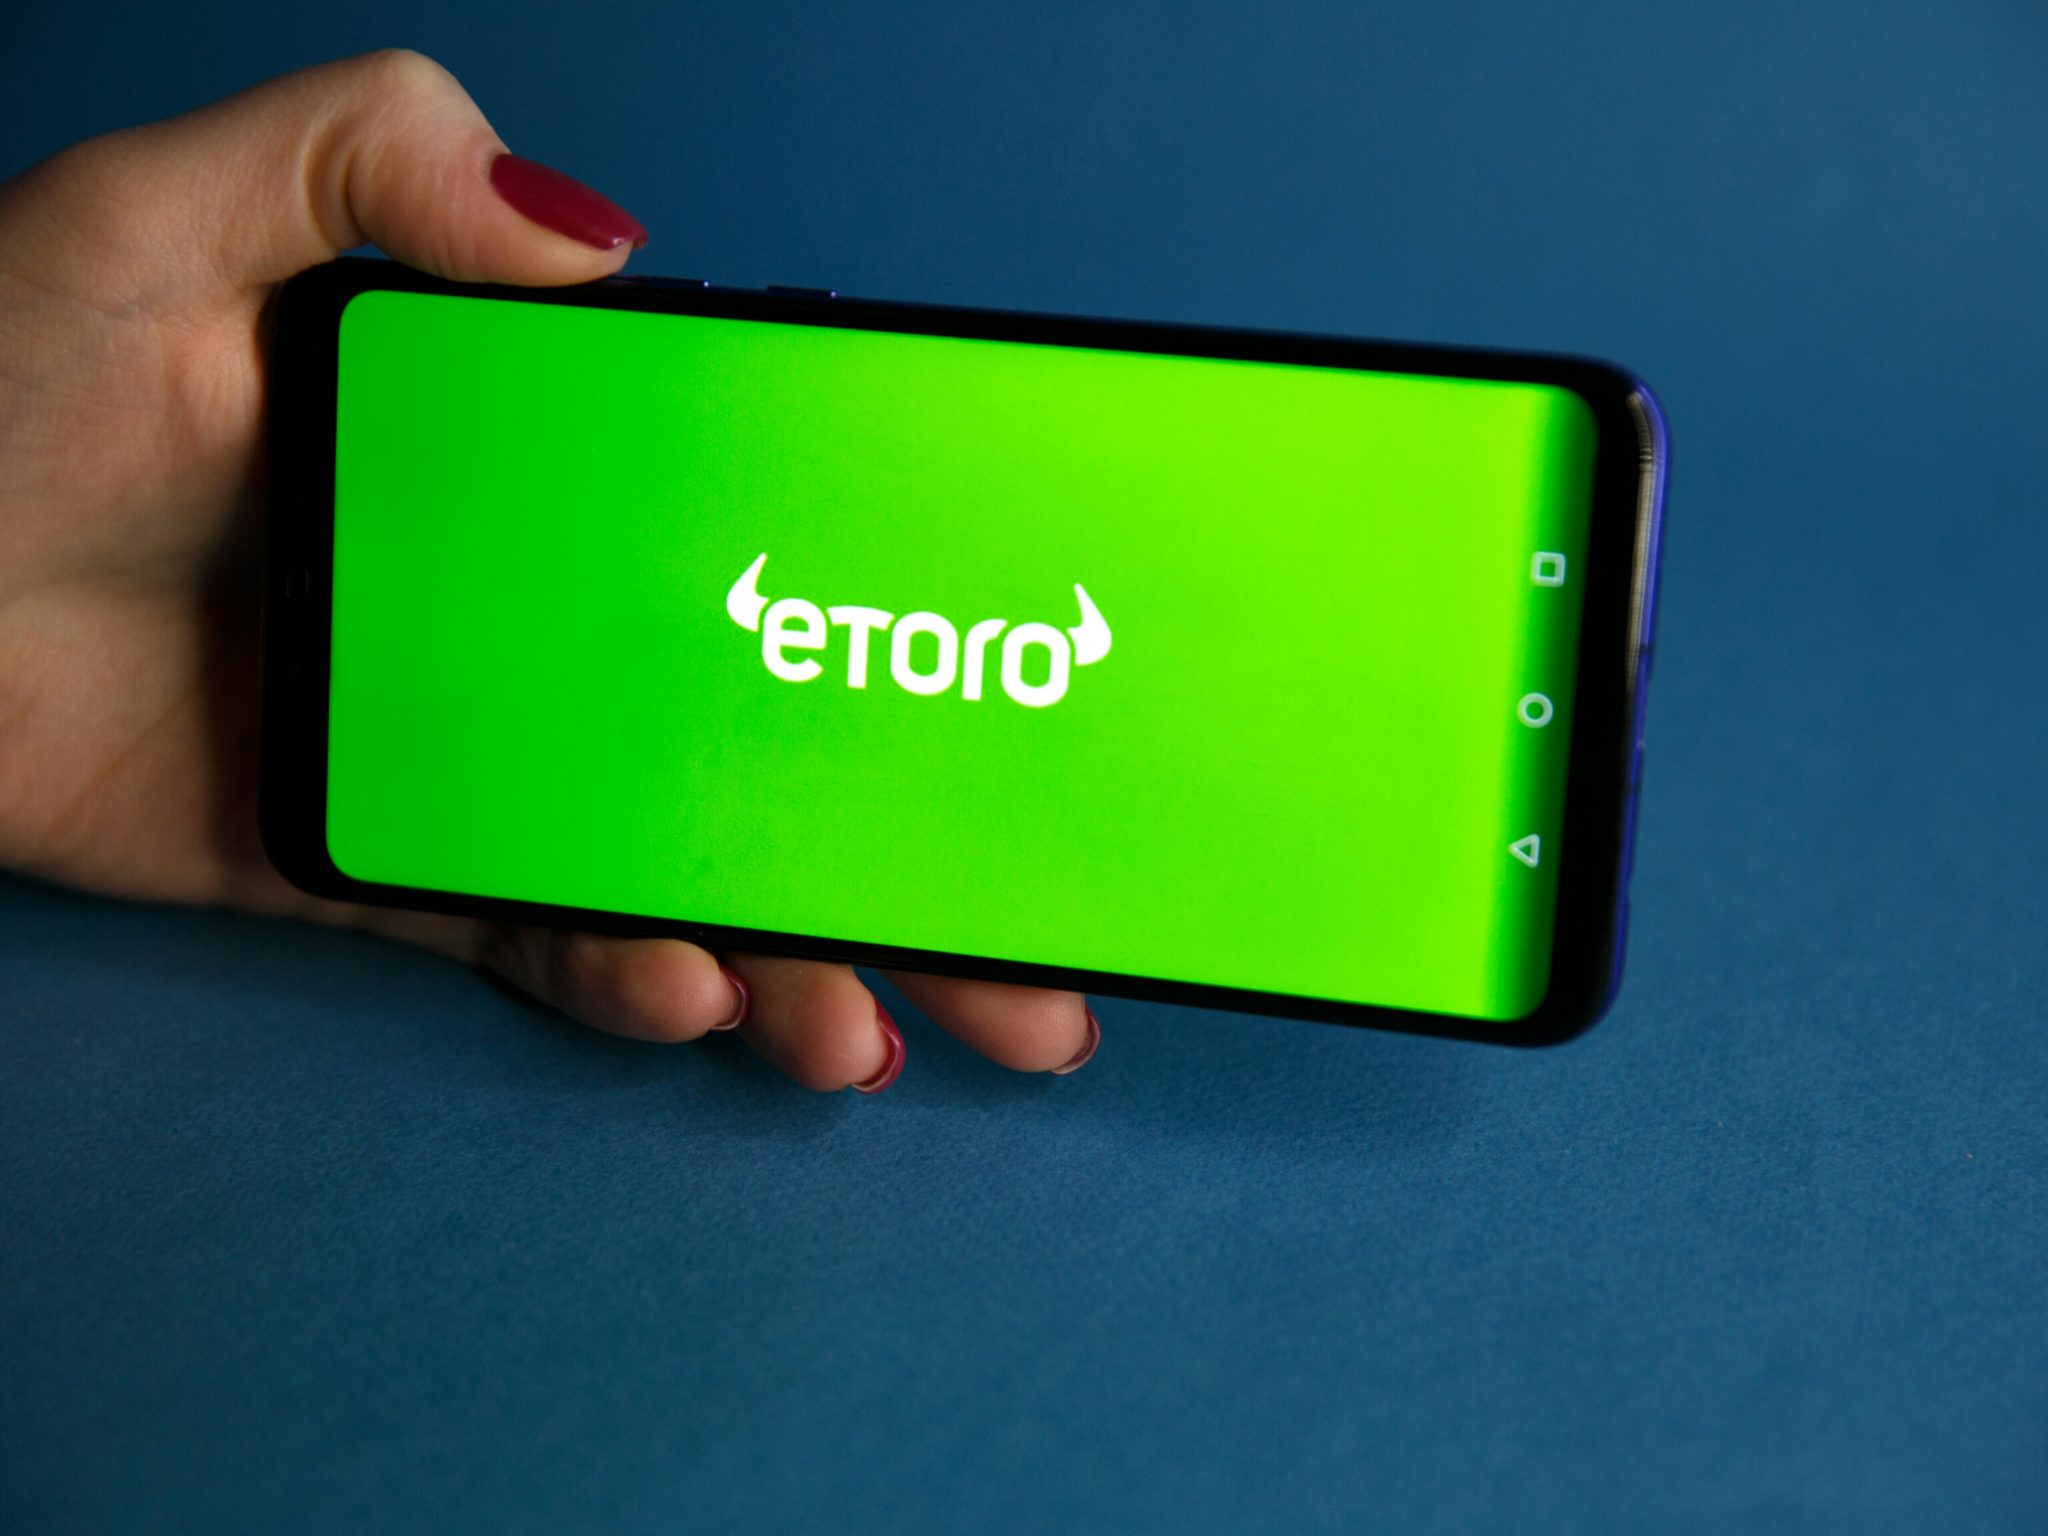 eToro Wallet in 2021 – Sign Up and Get a Free Wallet